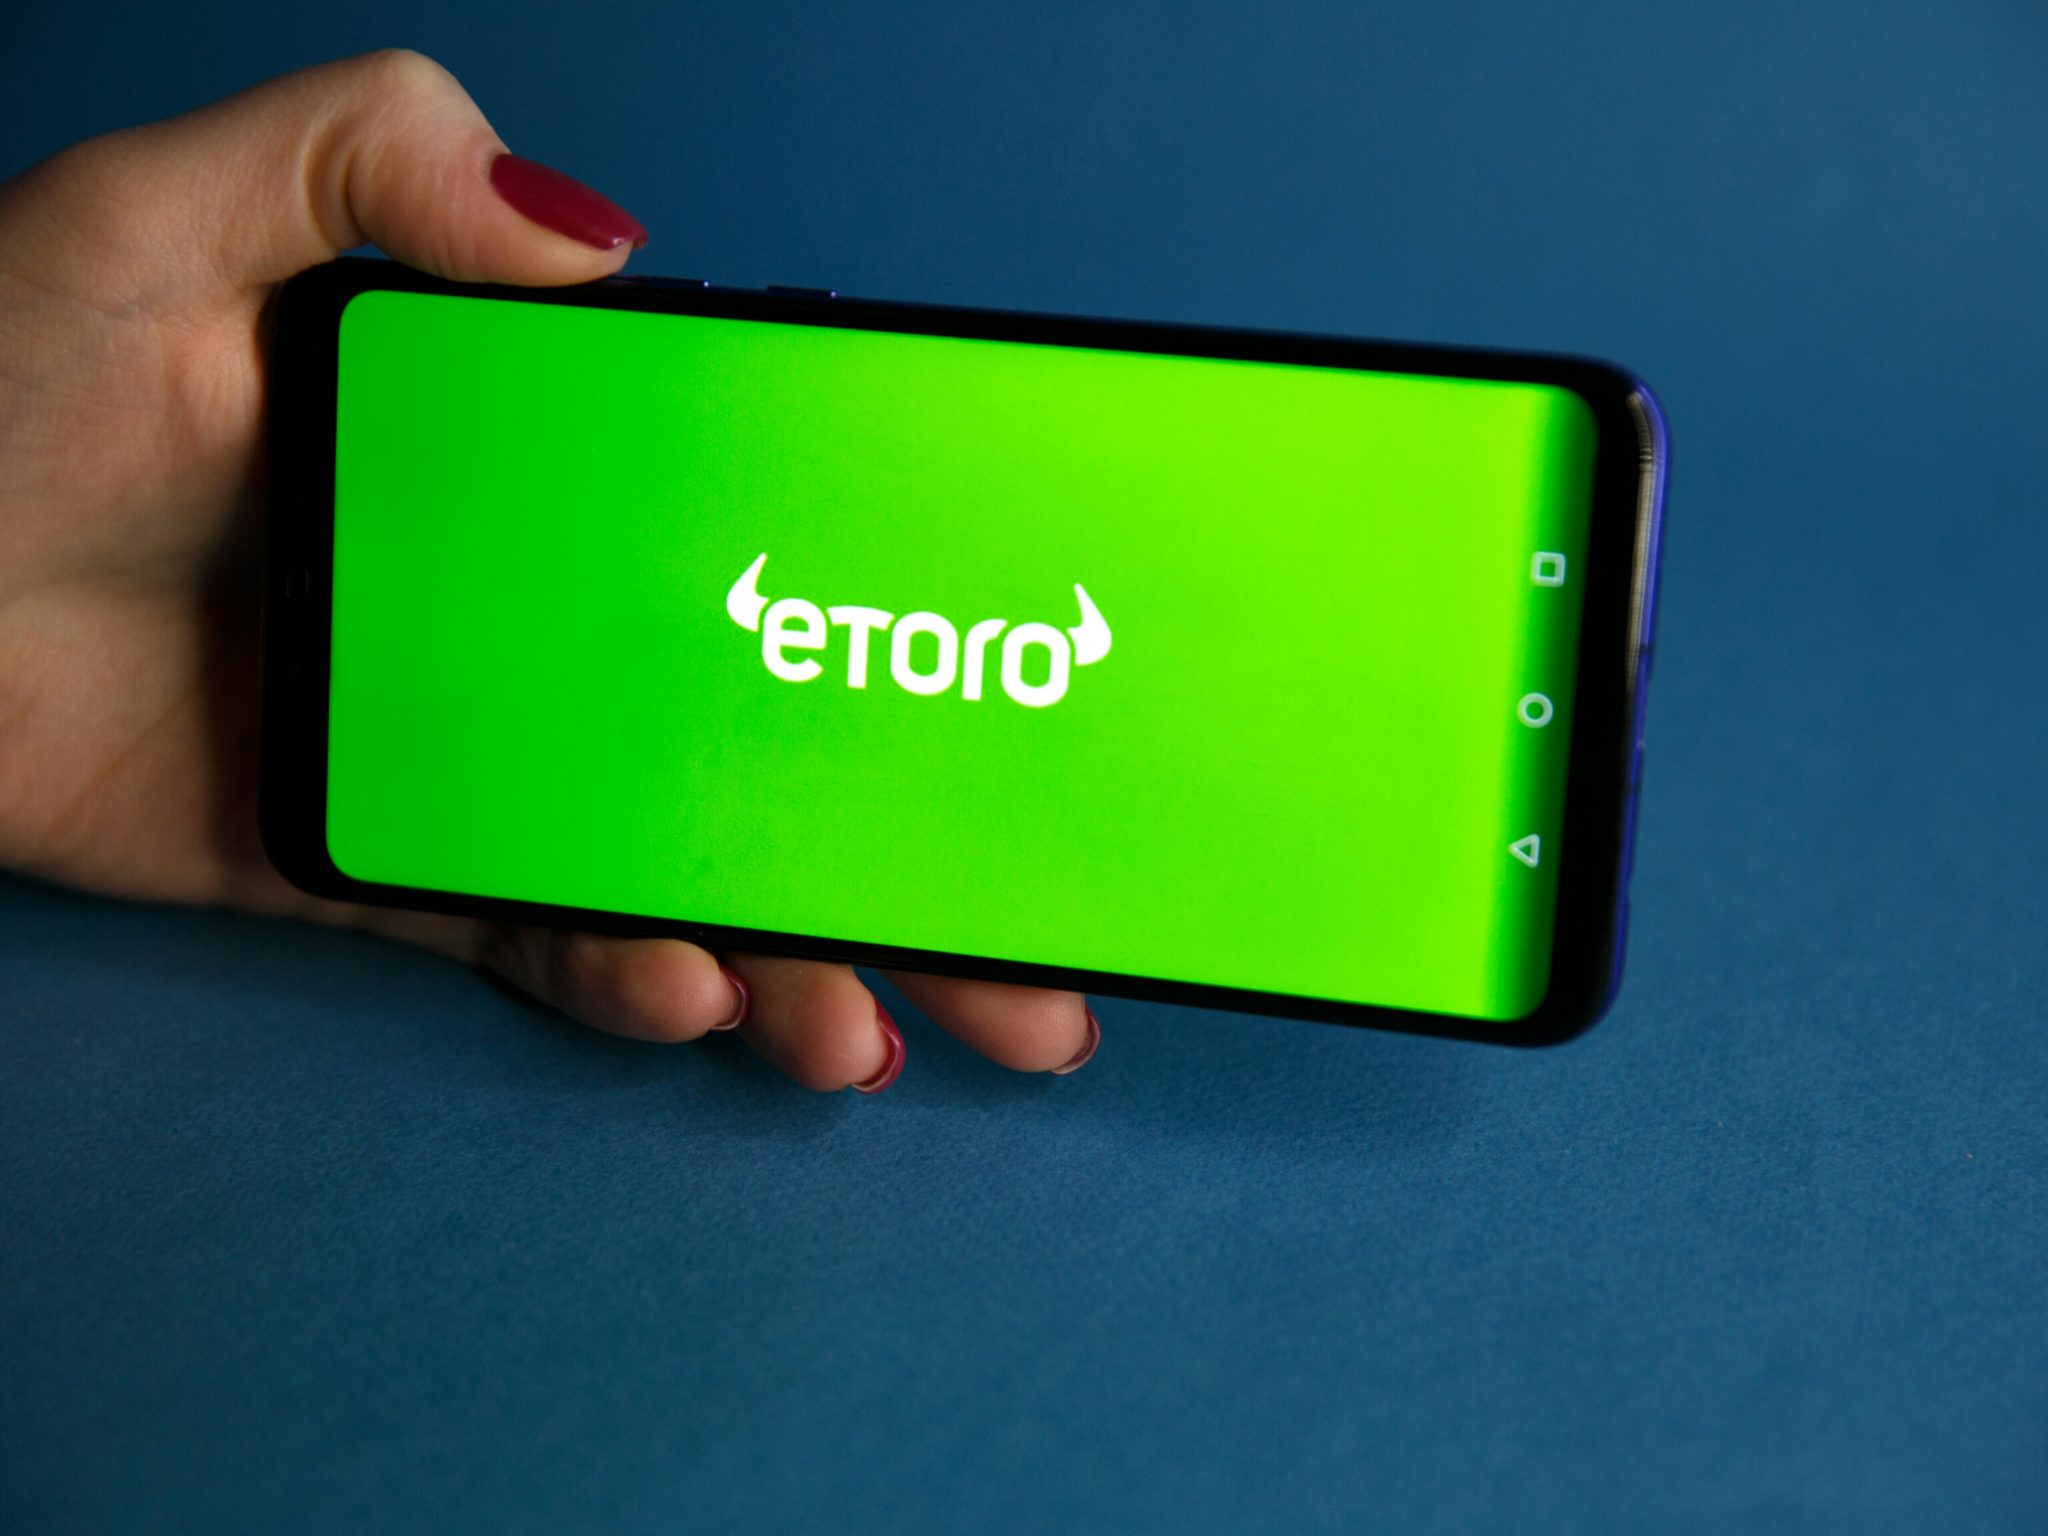 eToro Wallet in 2021 – Sign Up and Get a Free Wallet